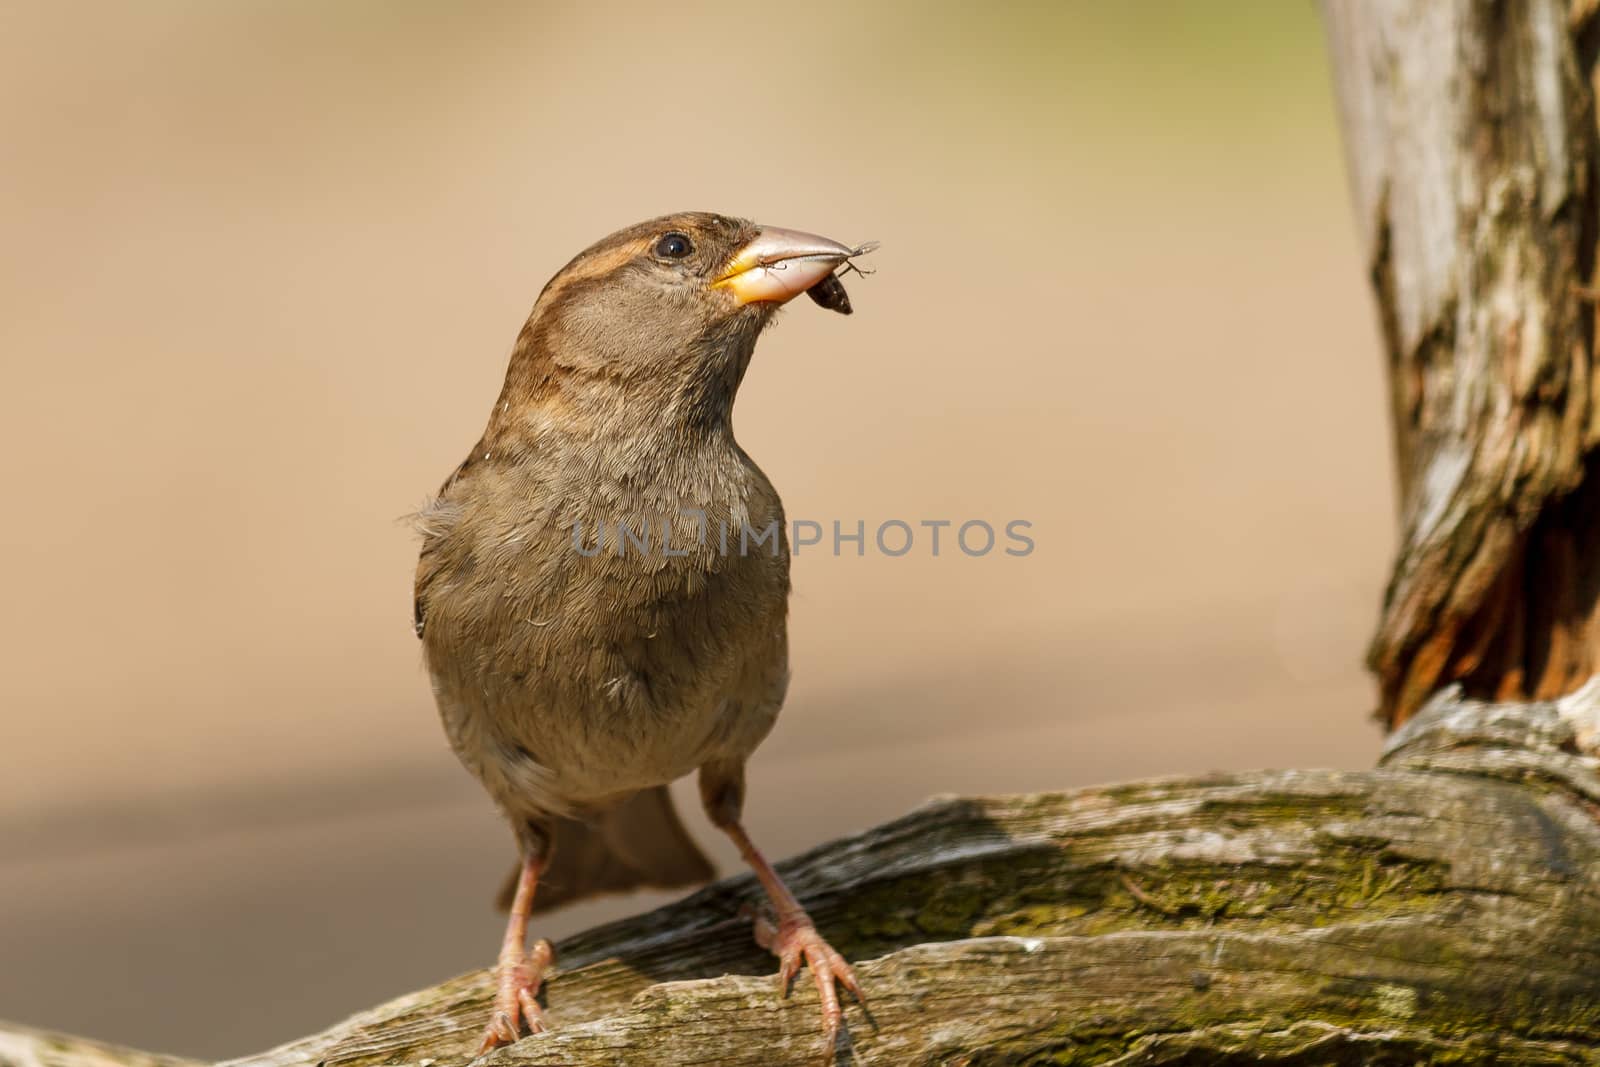 Brown sparrow standing on a branch. Shot closeup with an insect it's mouth